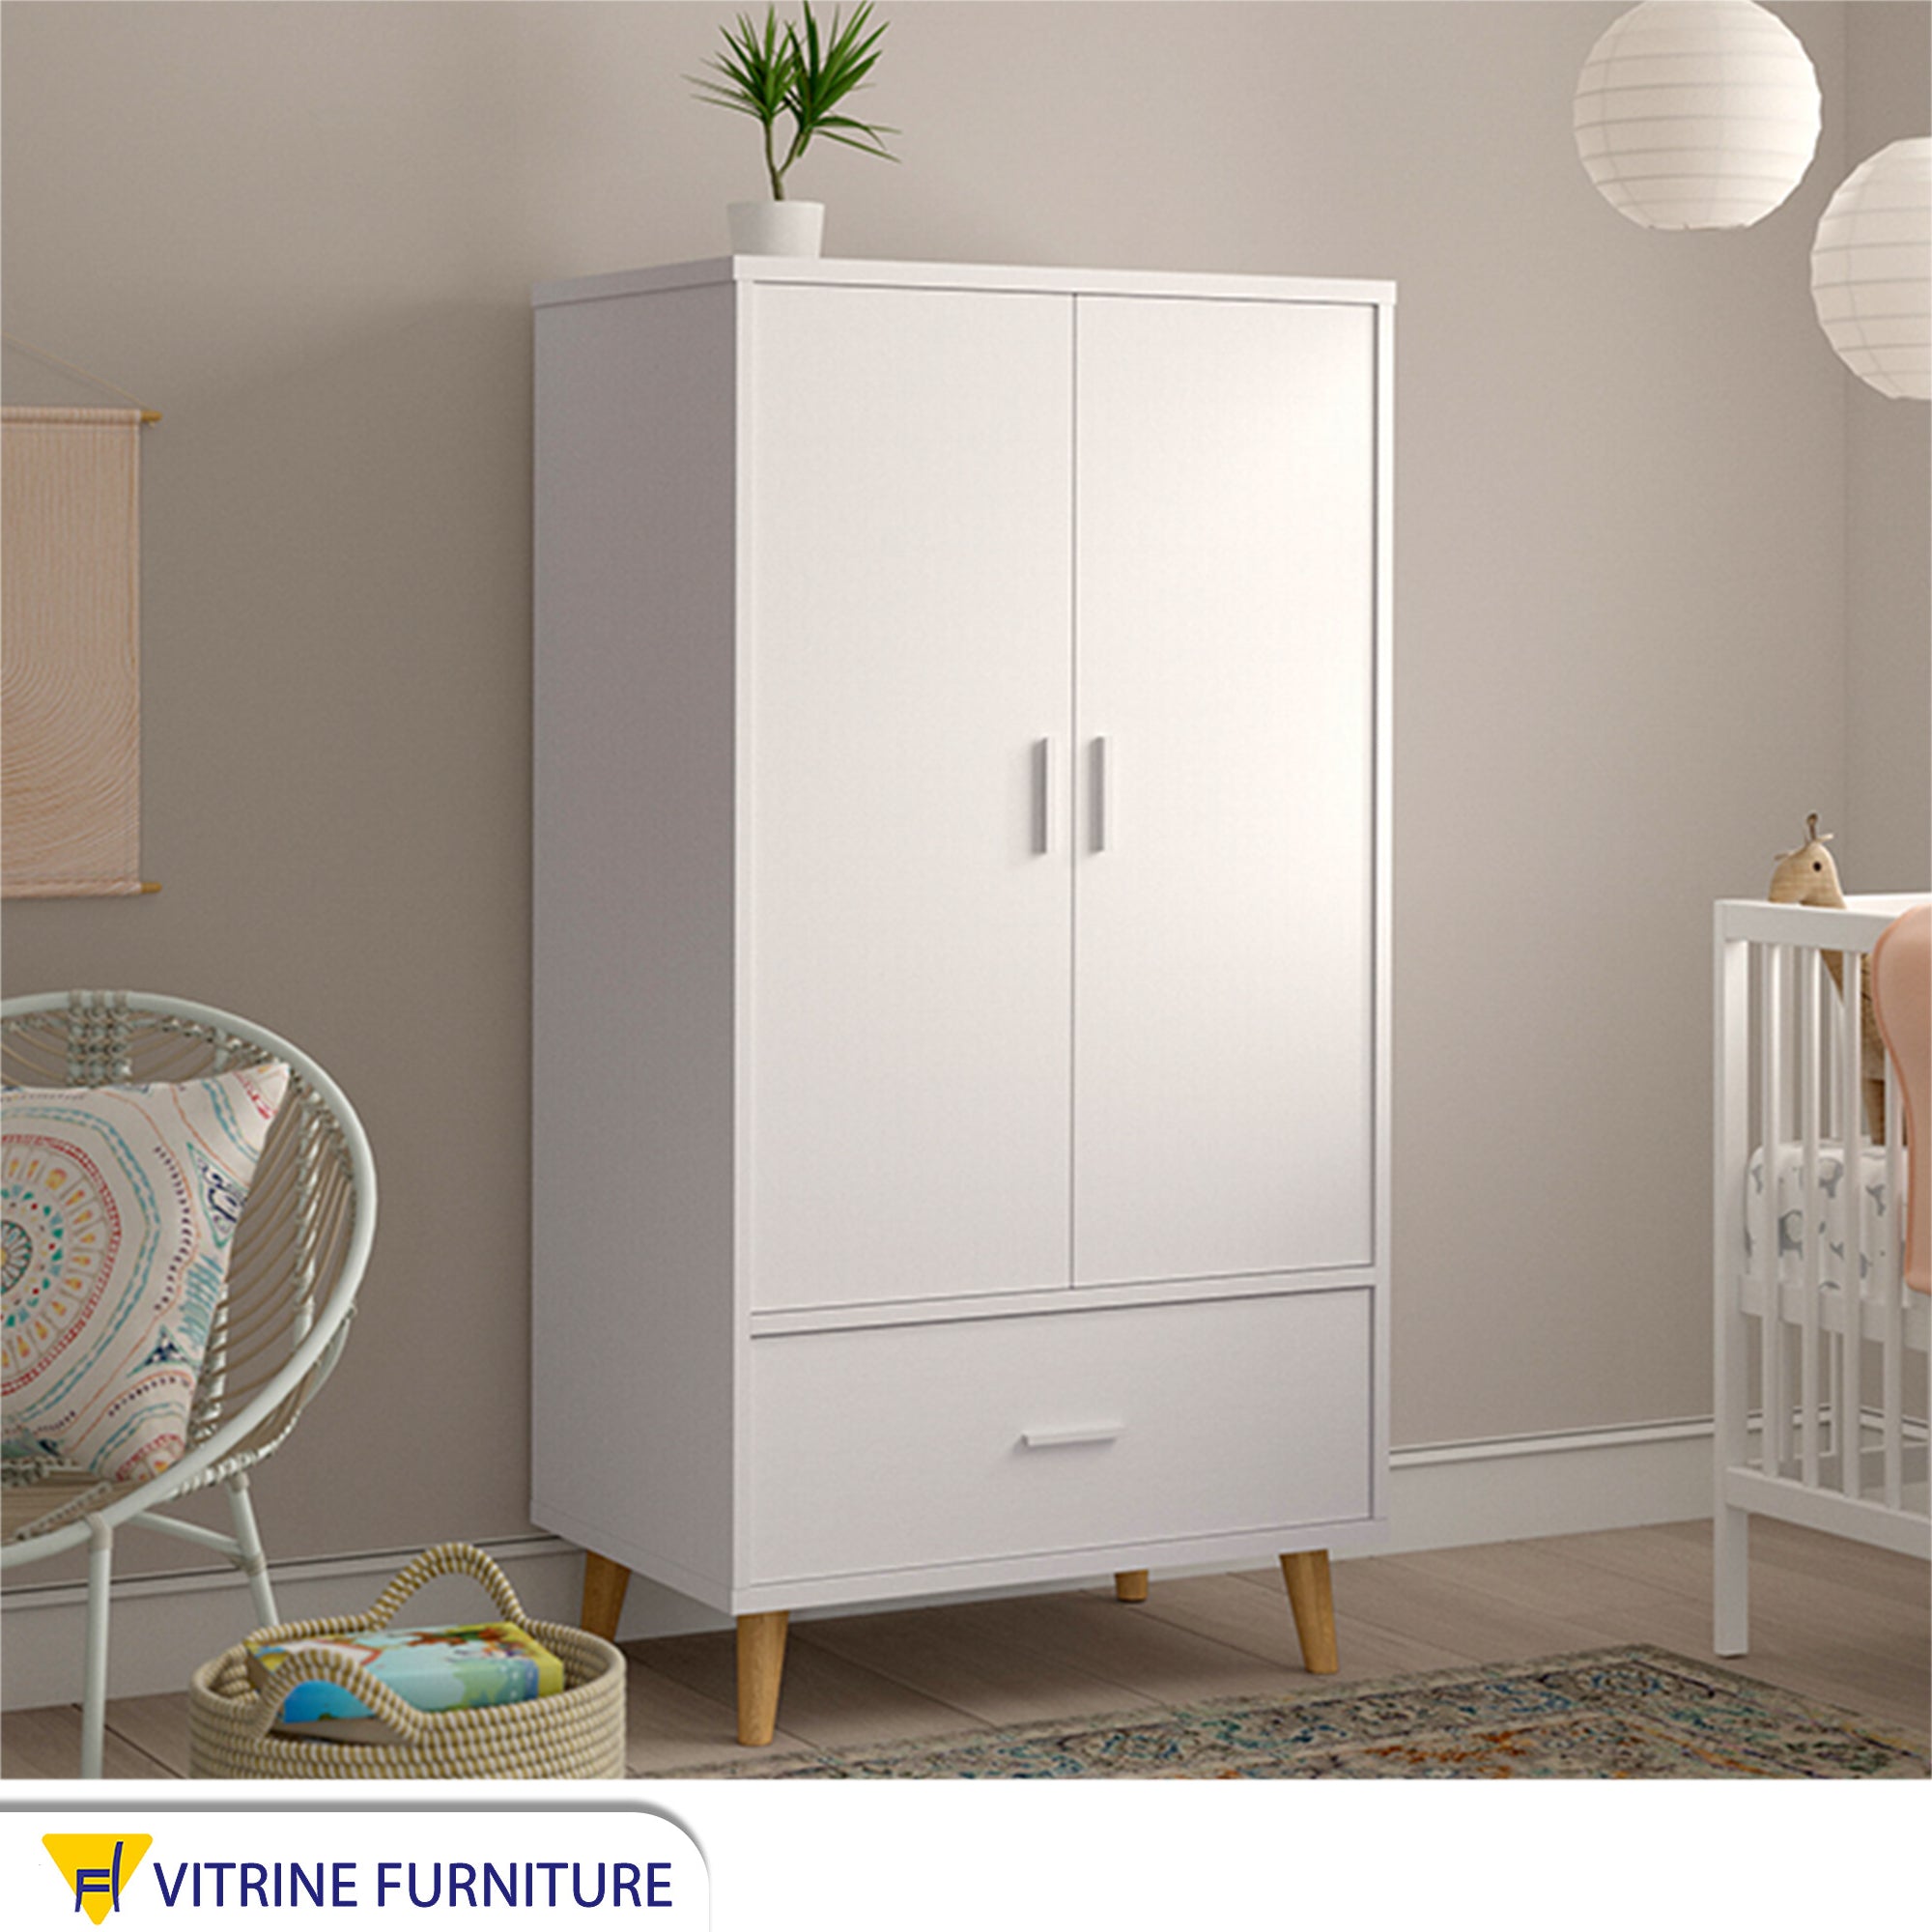 Double-door wardrobe with a large drawer and high legs